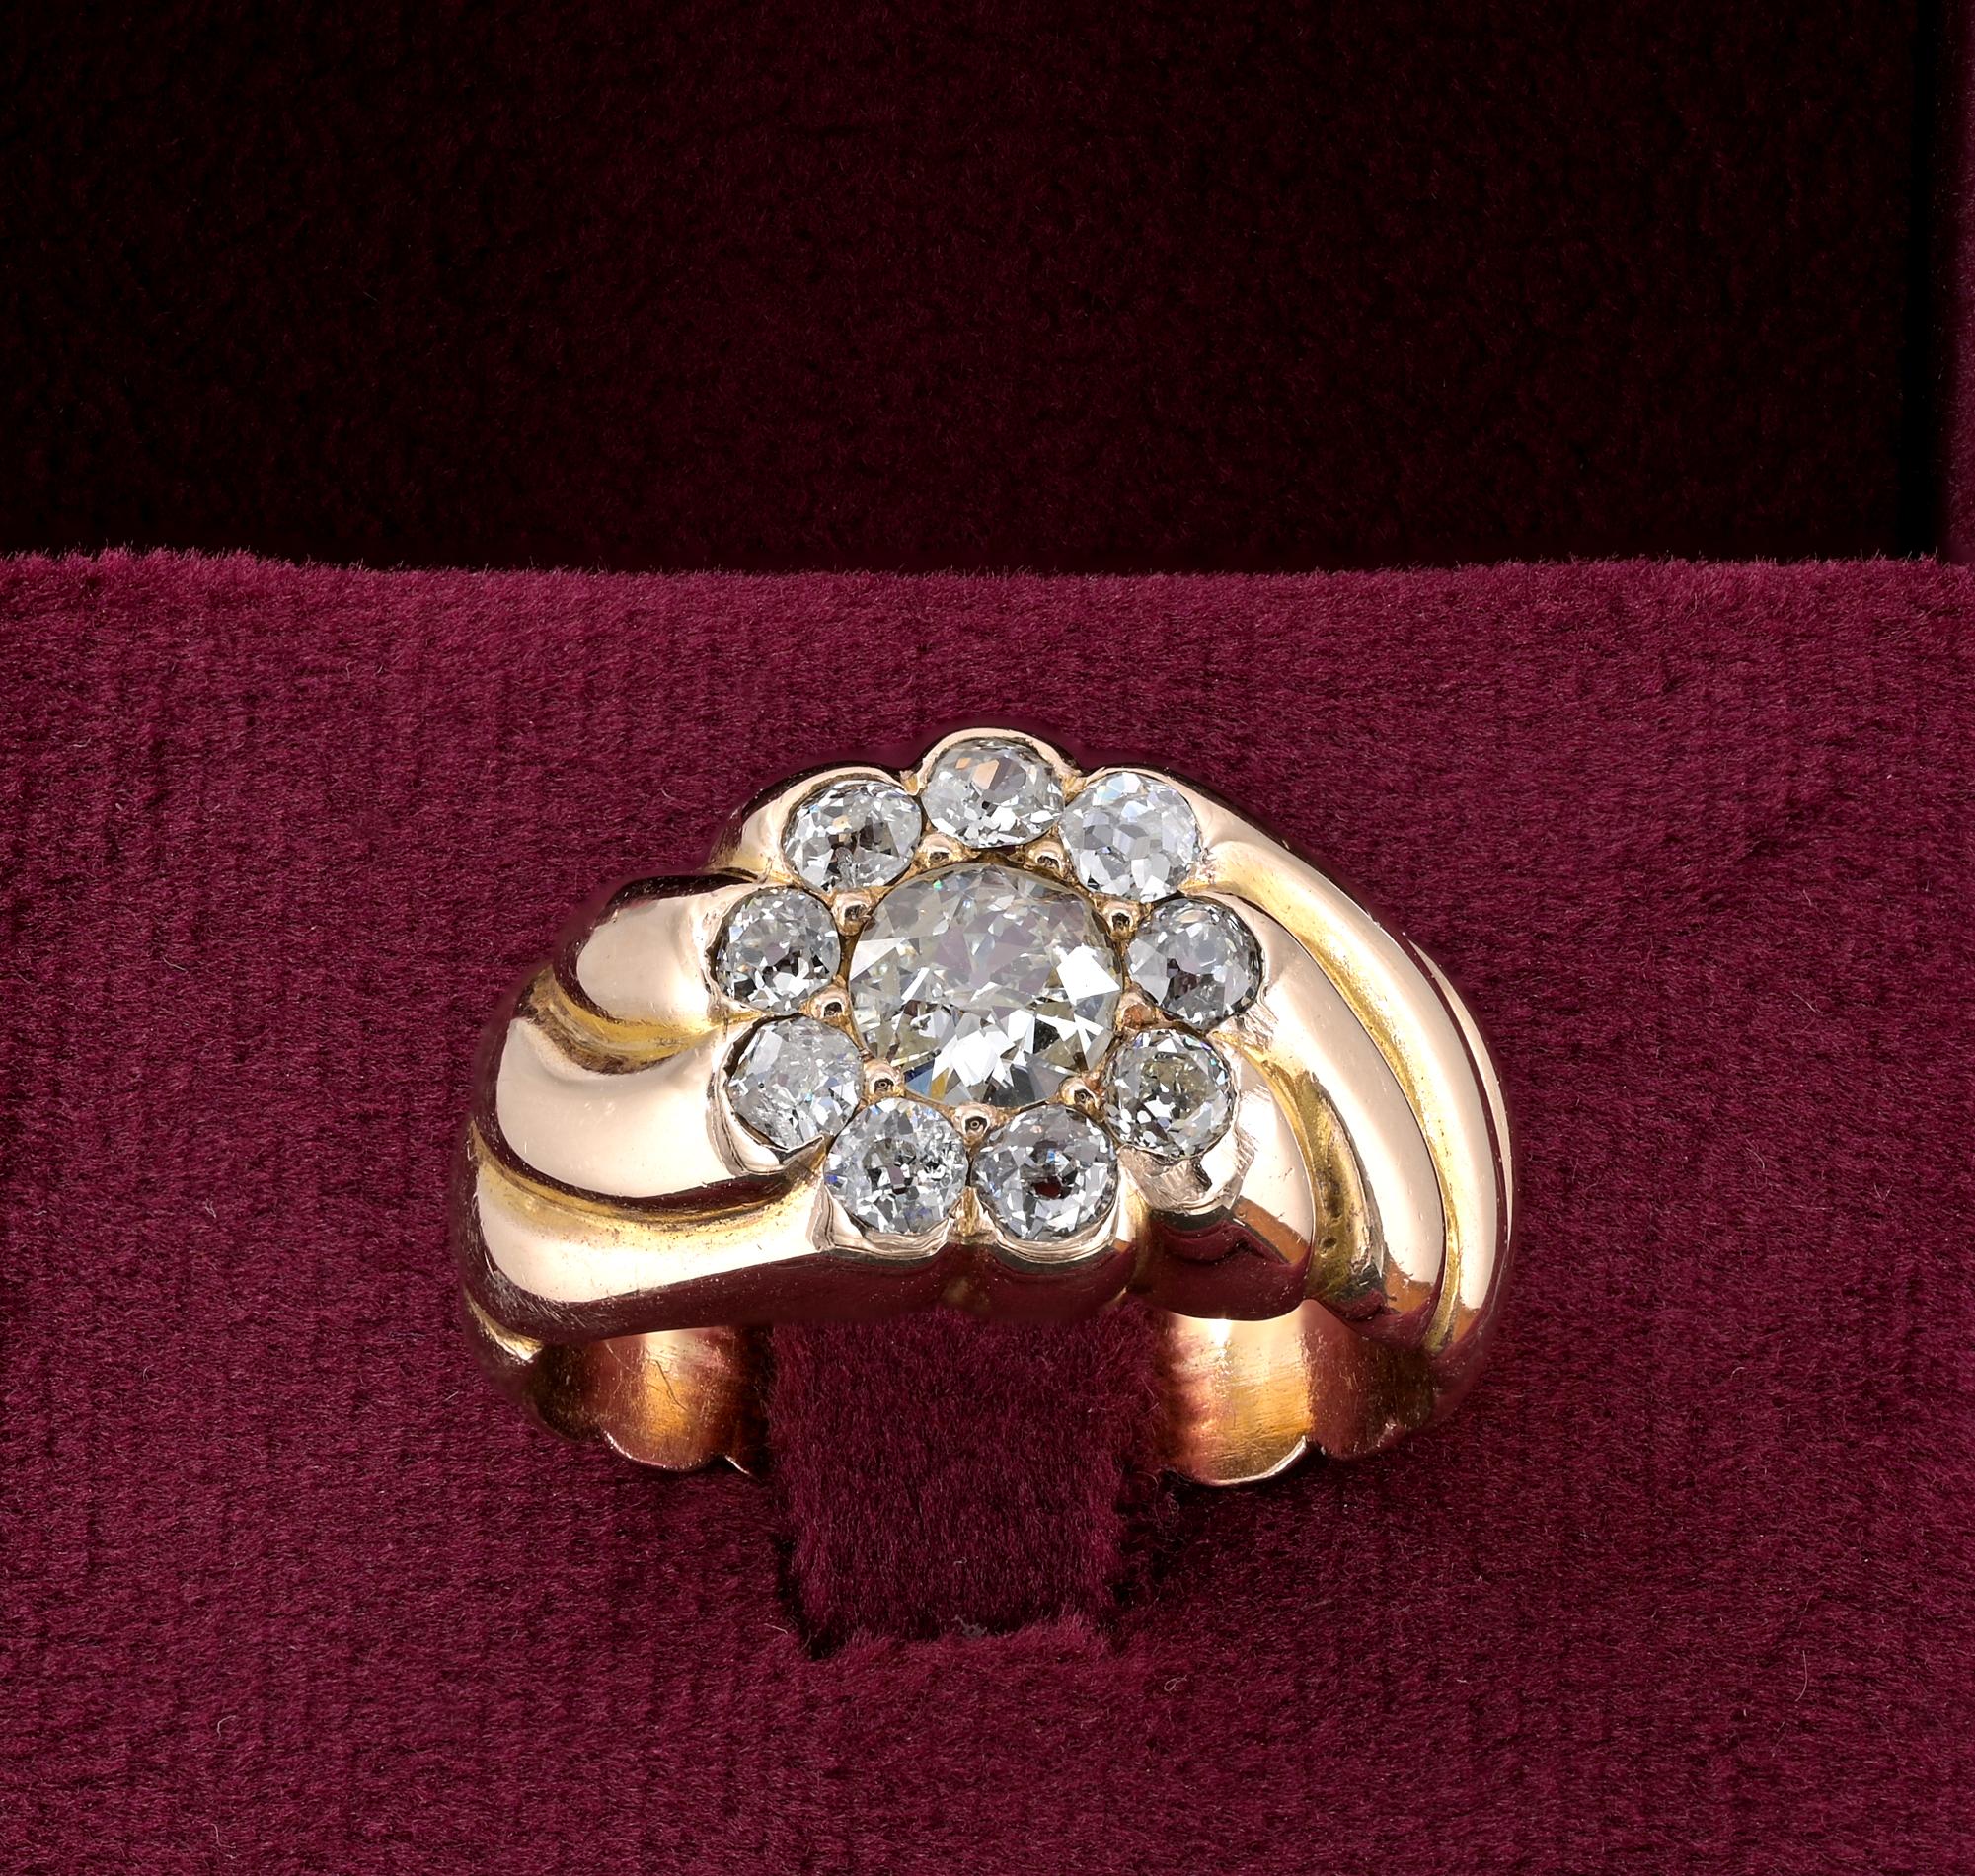 This fabulous late Victorian ring is 1900 ca
Beautiful carved twisted mount hand made of solid 18 KT gold centred by a cluster of Diamond
Weight is 11.8 grams
Set with a selection of old European cut centre Diamond is .60 Ct. (J/VS/Si) spreading as